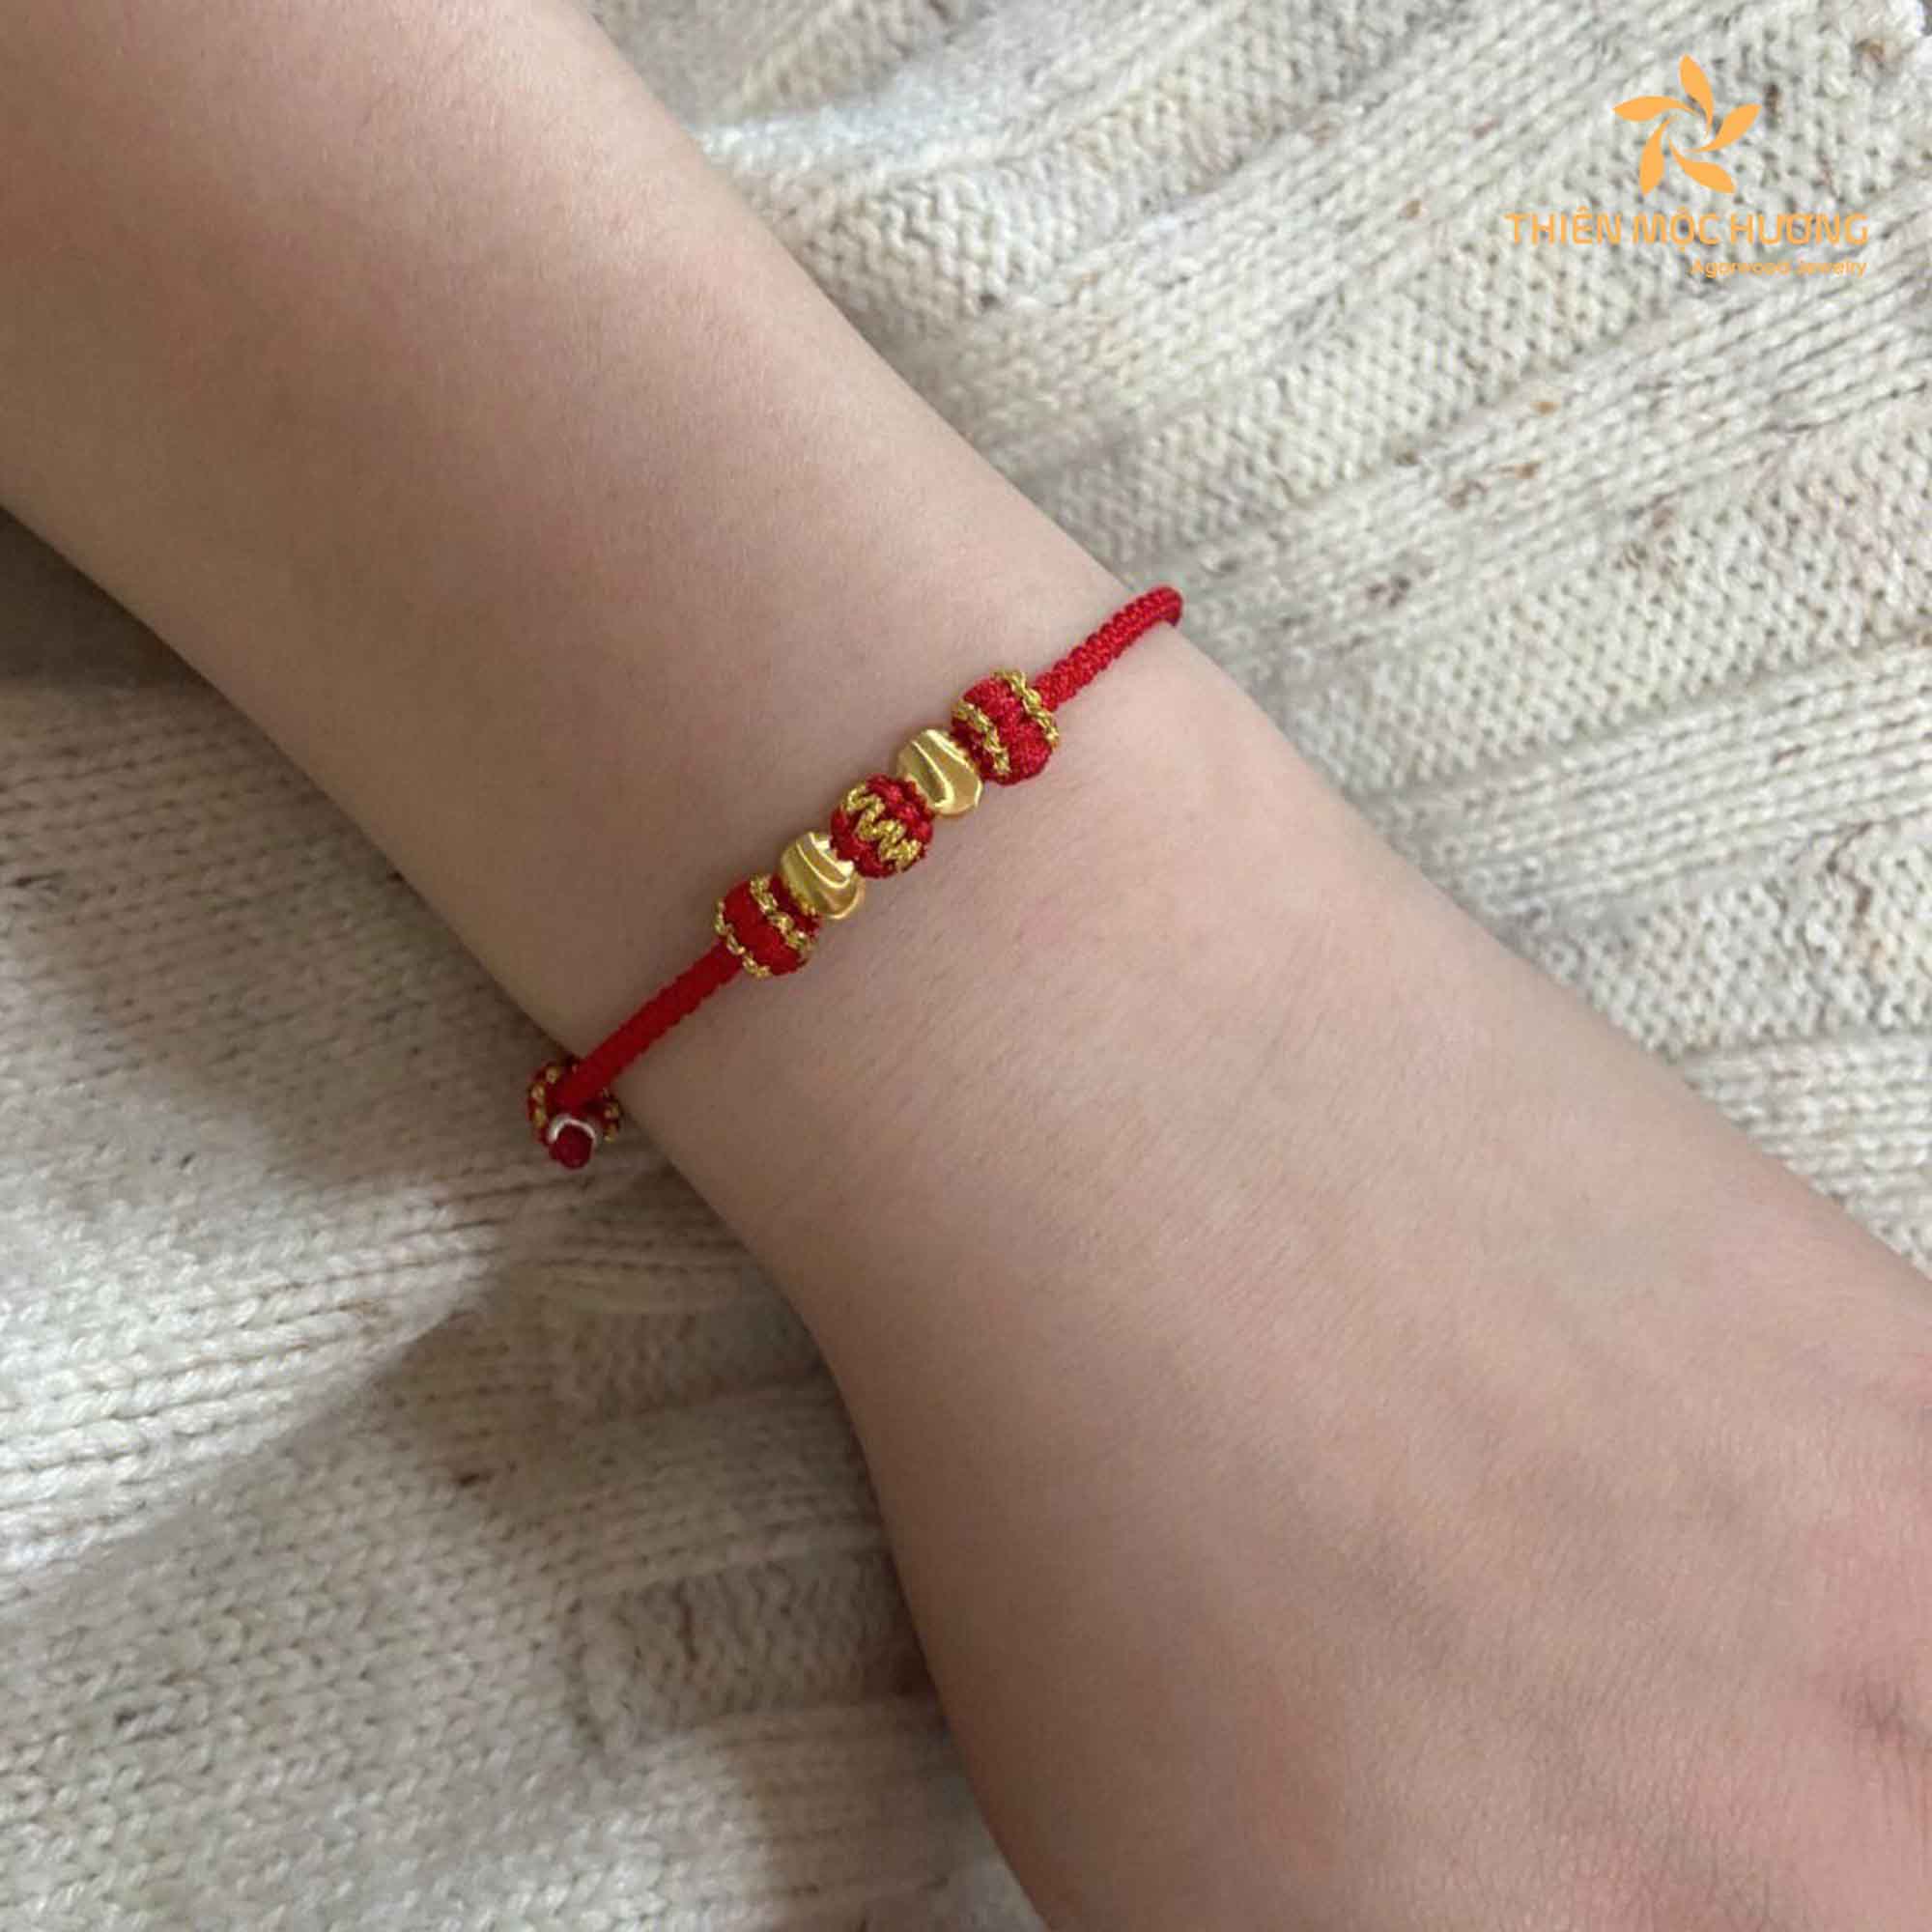 Understanding the significance of red string bracelets